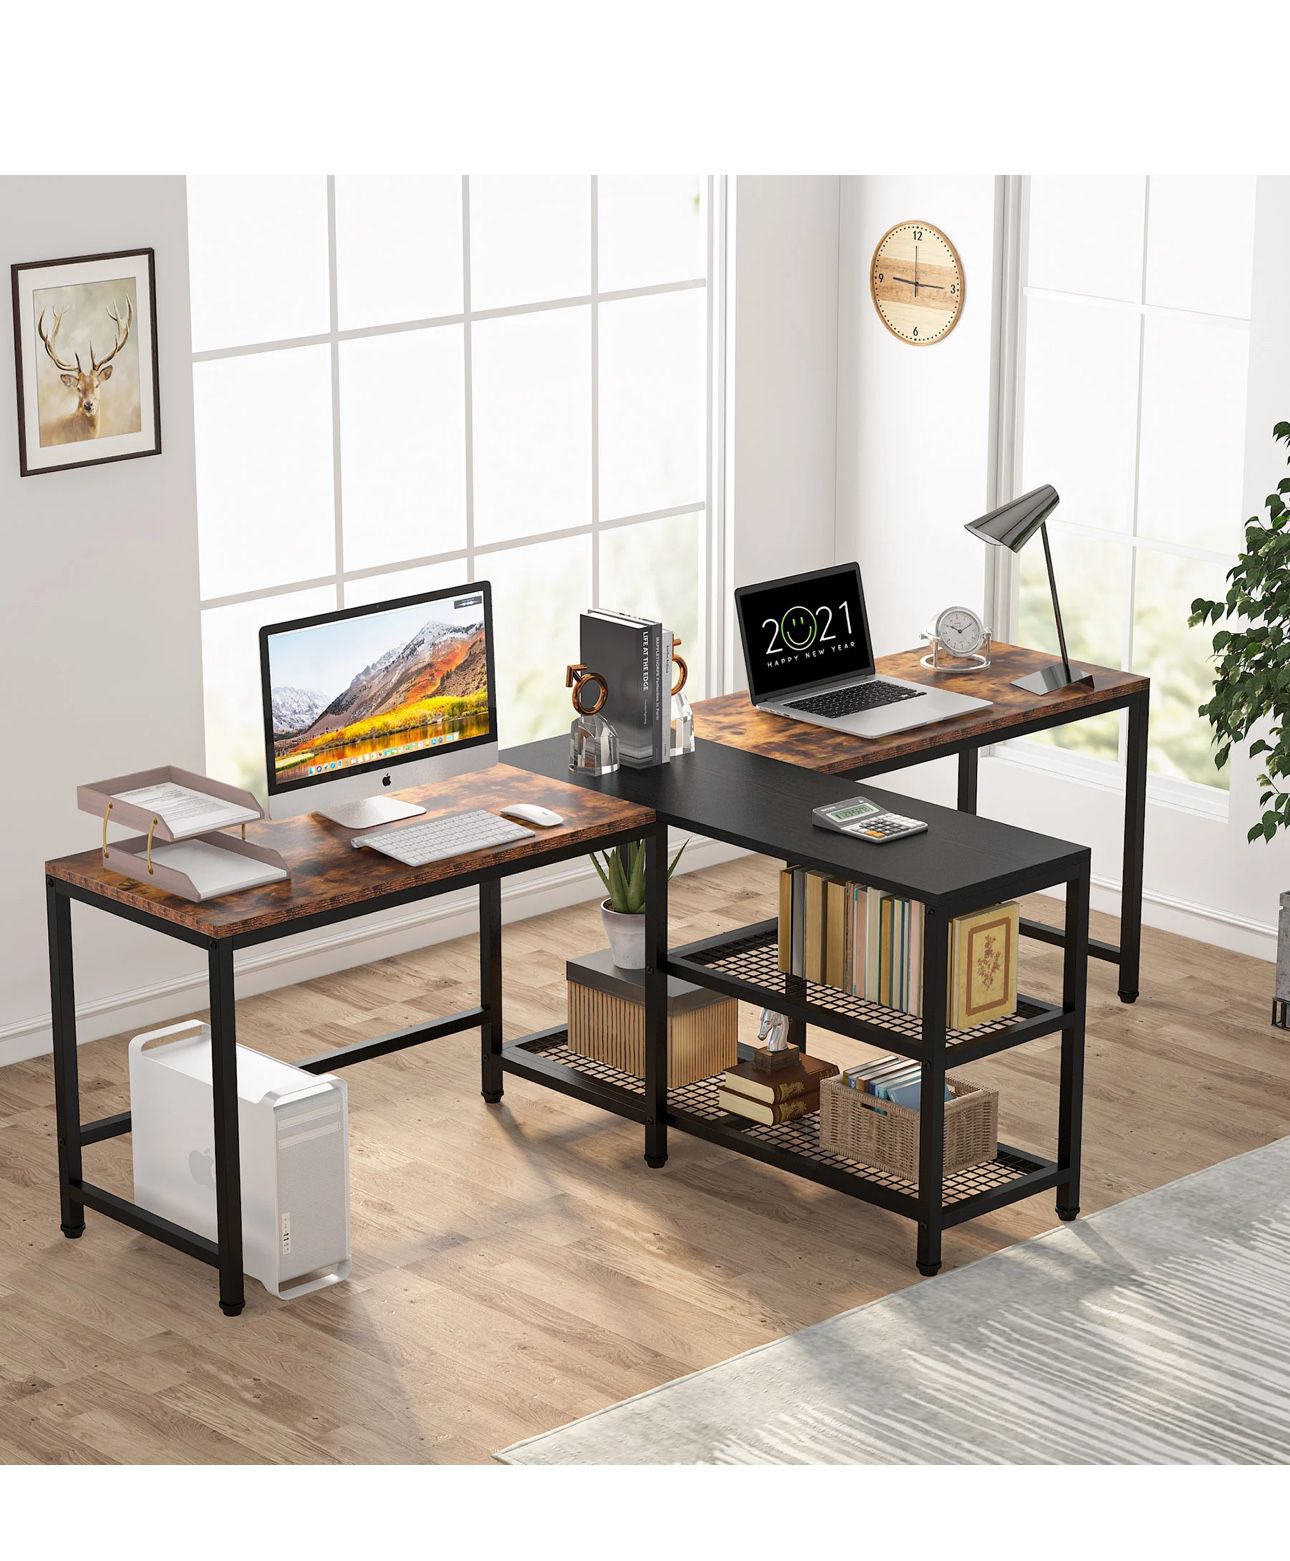 All New 94.48”Lx19.68”Wx29.52”H 2 Person Desk With Shelves 